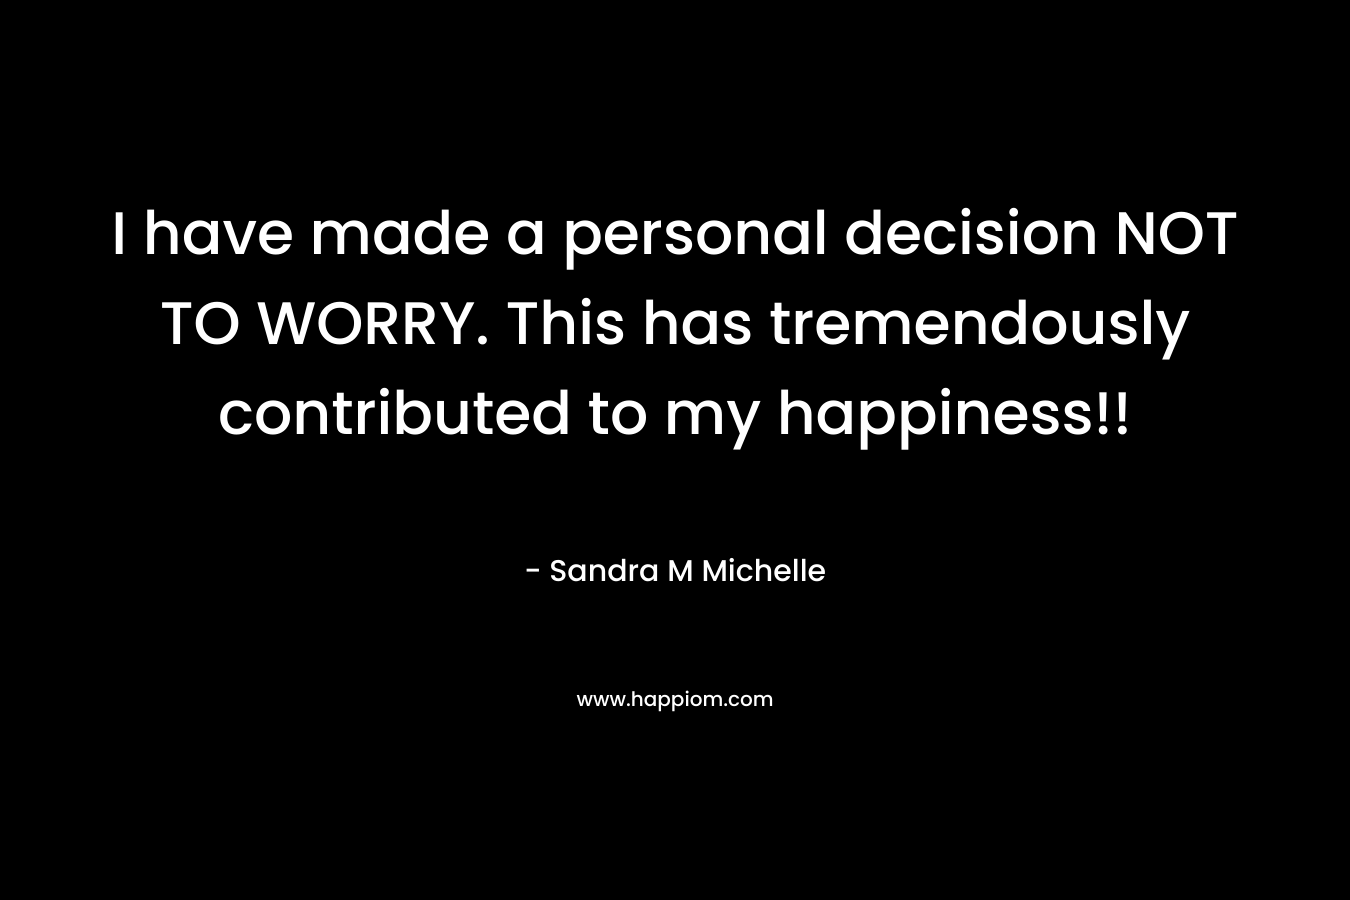 I have made a personal decision NOT TO WORRY. This has tremendously contributed to my happiness!! – Sandra M Michelle